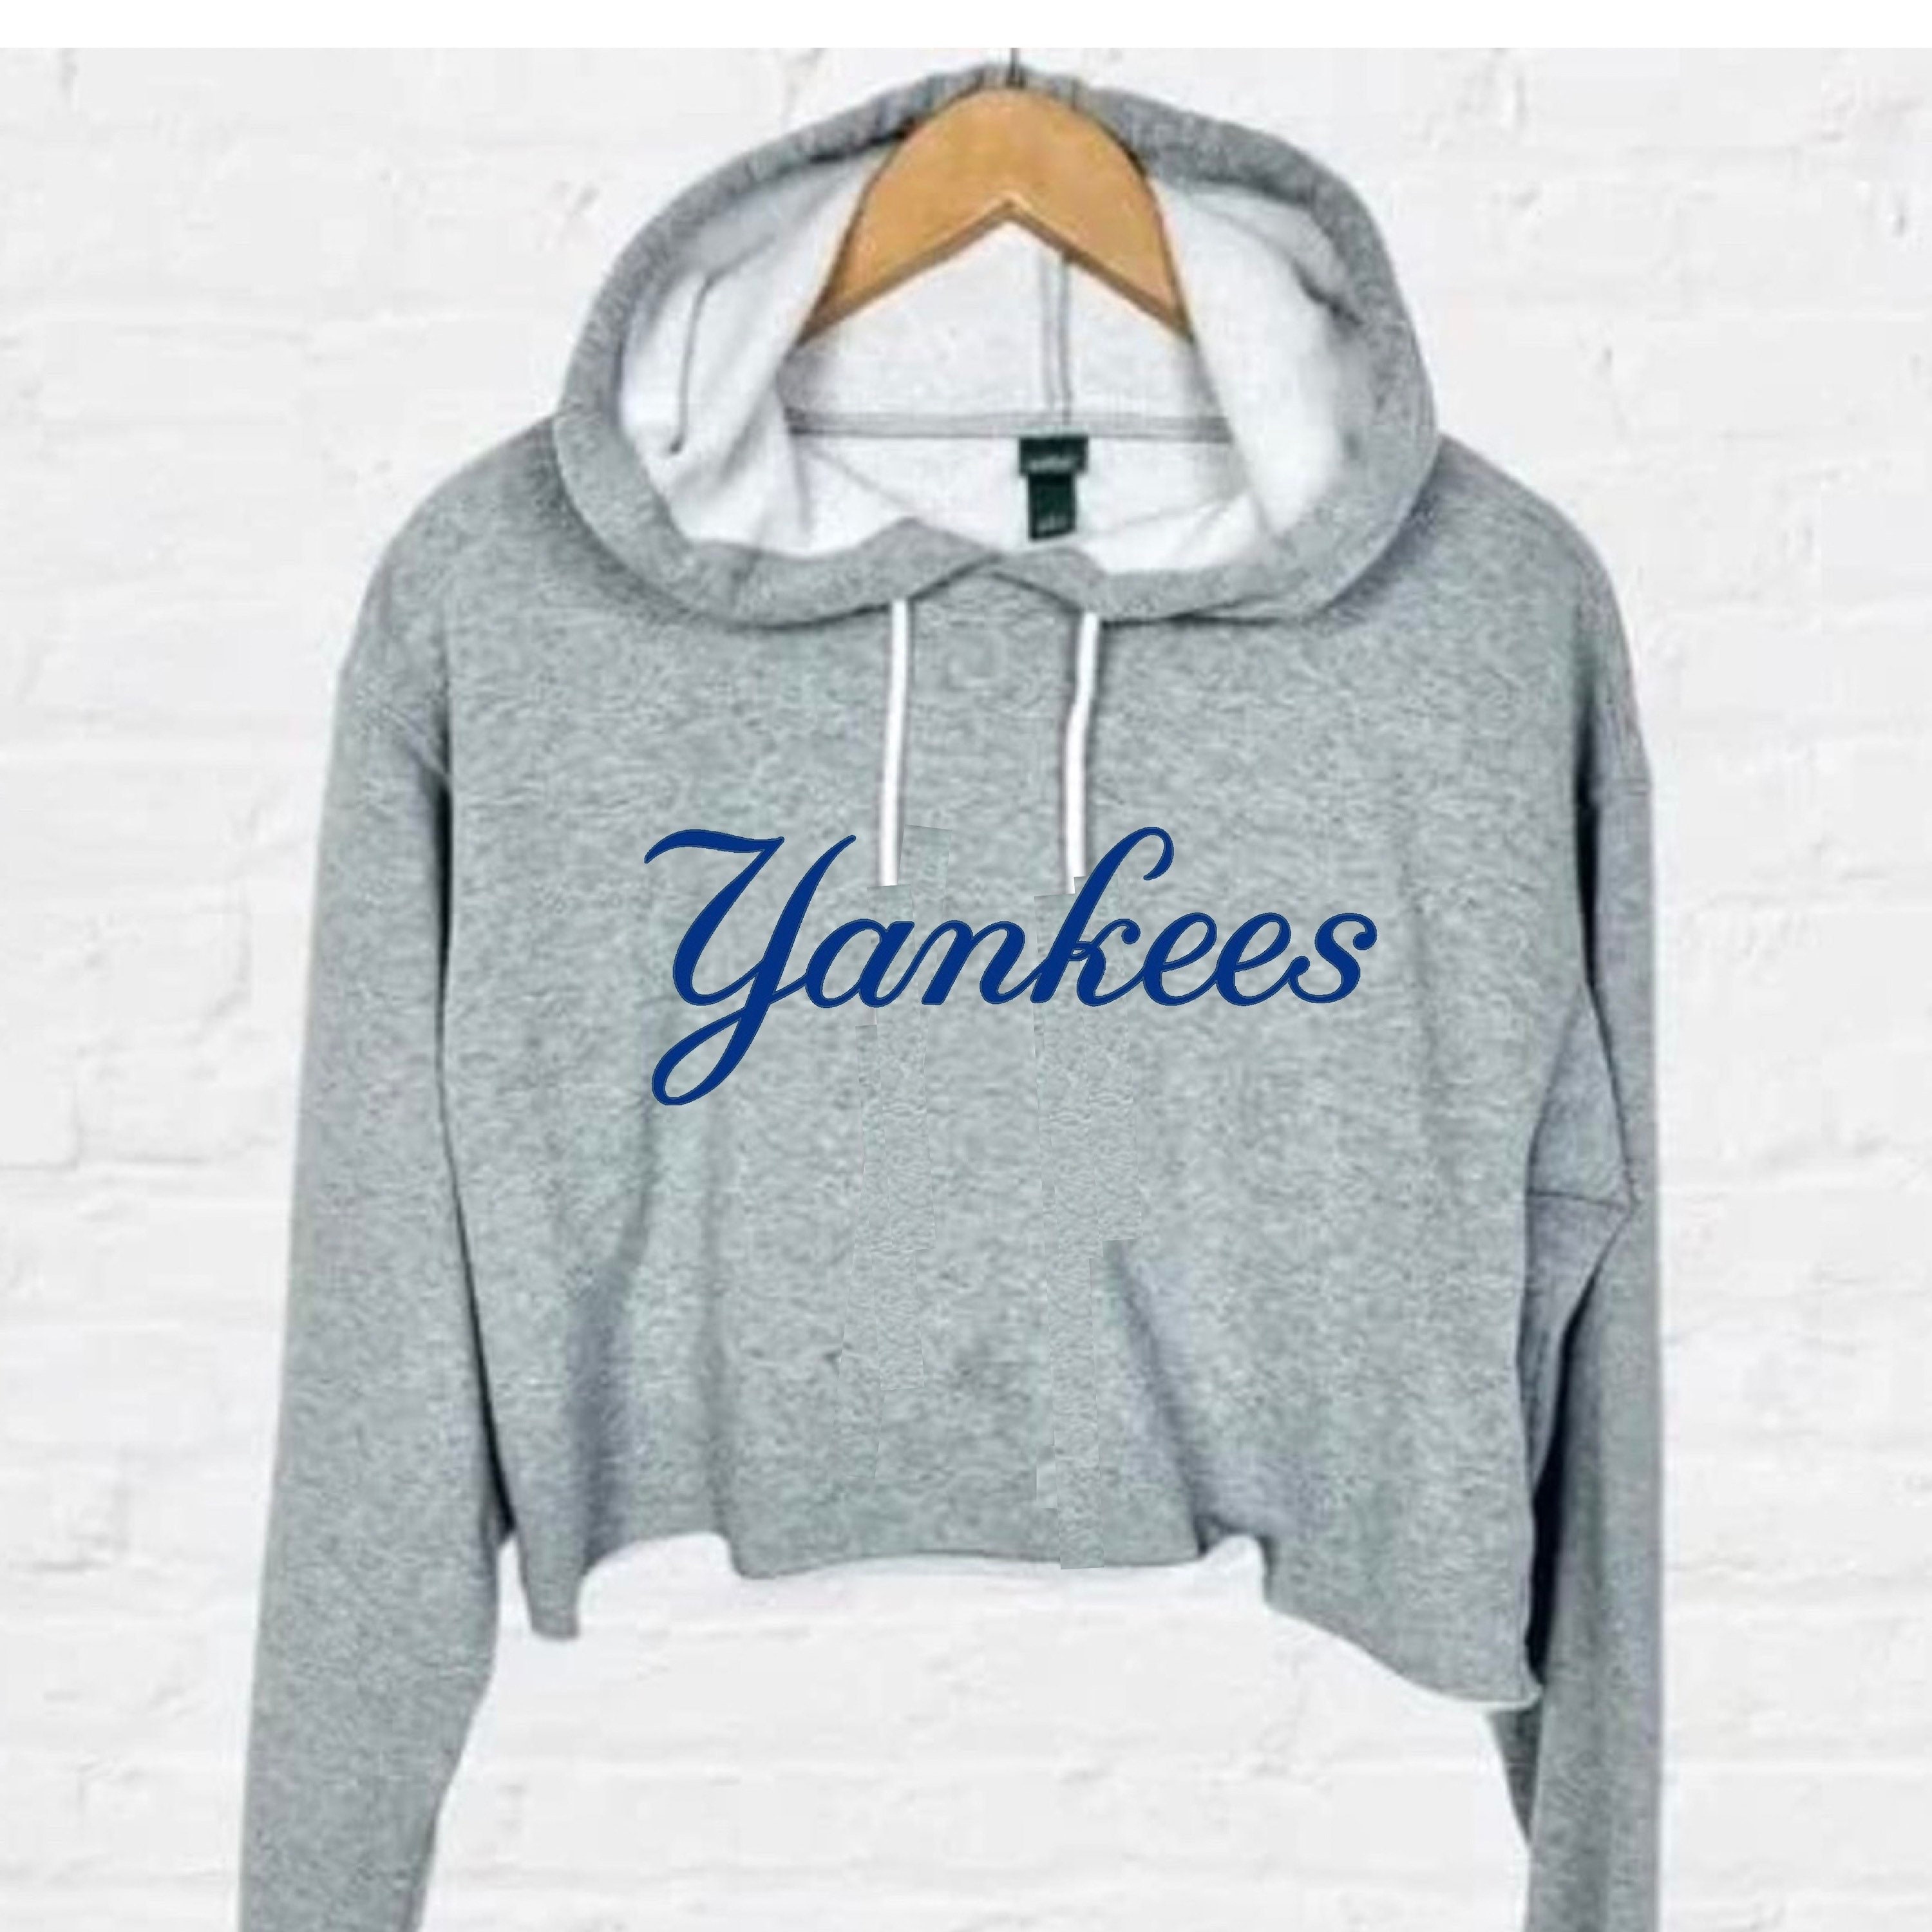 New York Yankees 2022 Postseason The East Is Ours shirt, hoodie, sweater,  long sleeve and tank top